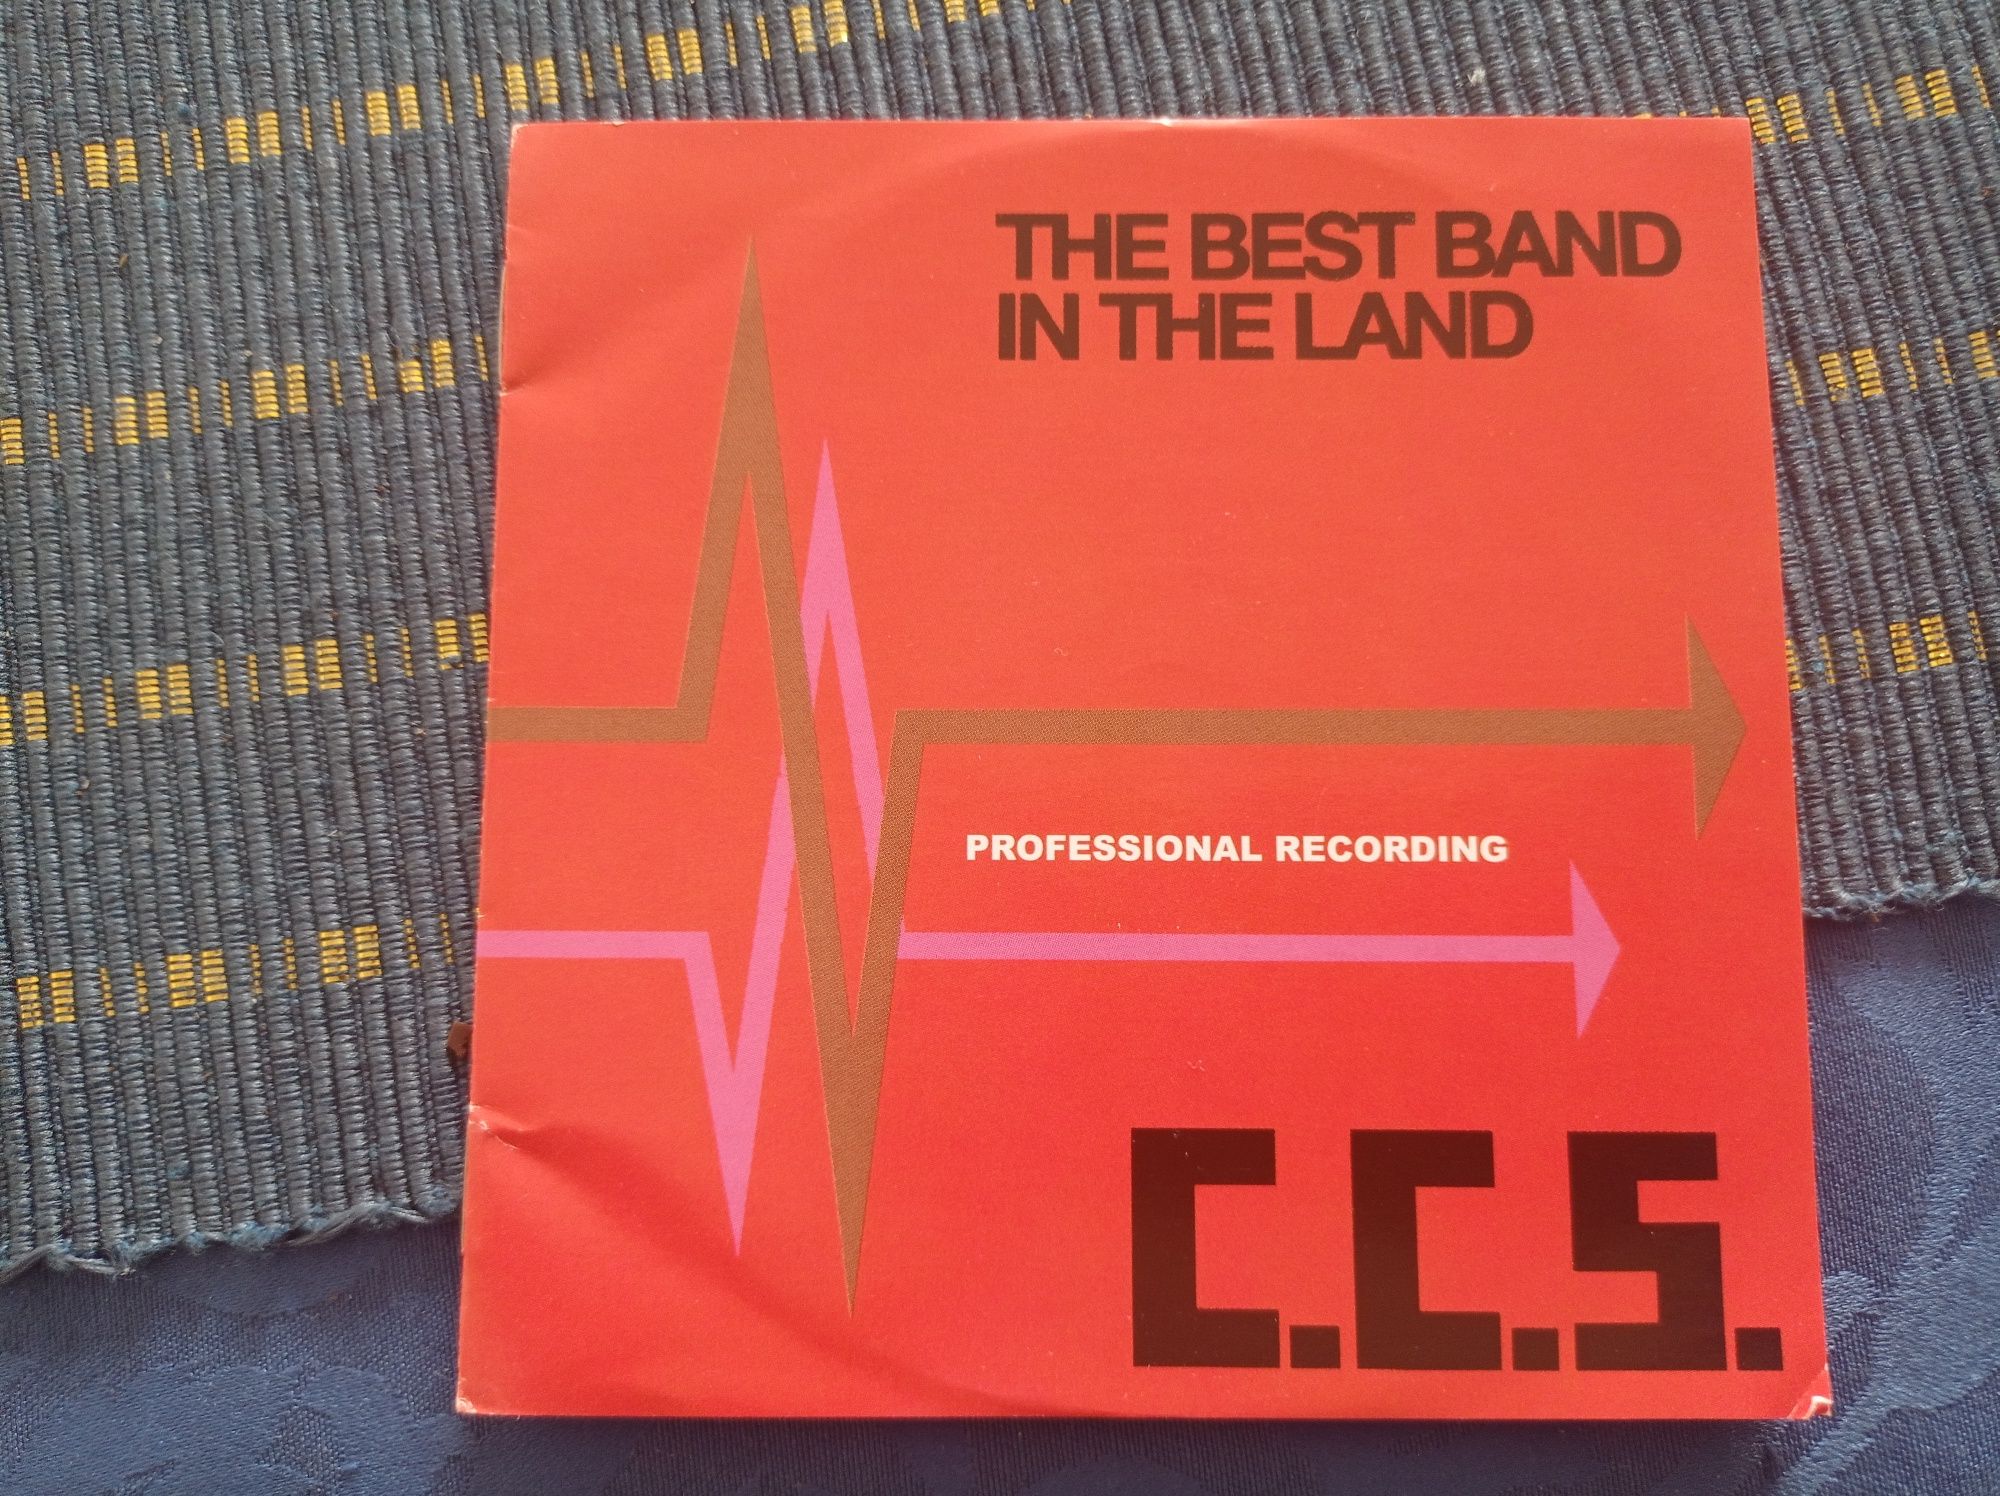 C. C. S. - The best band in The land